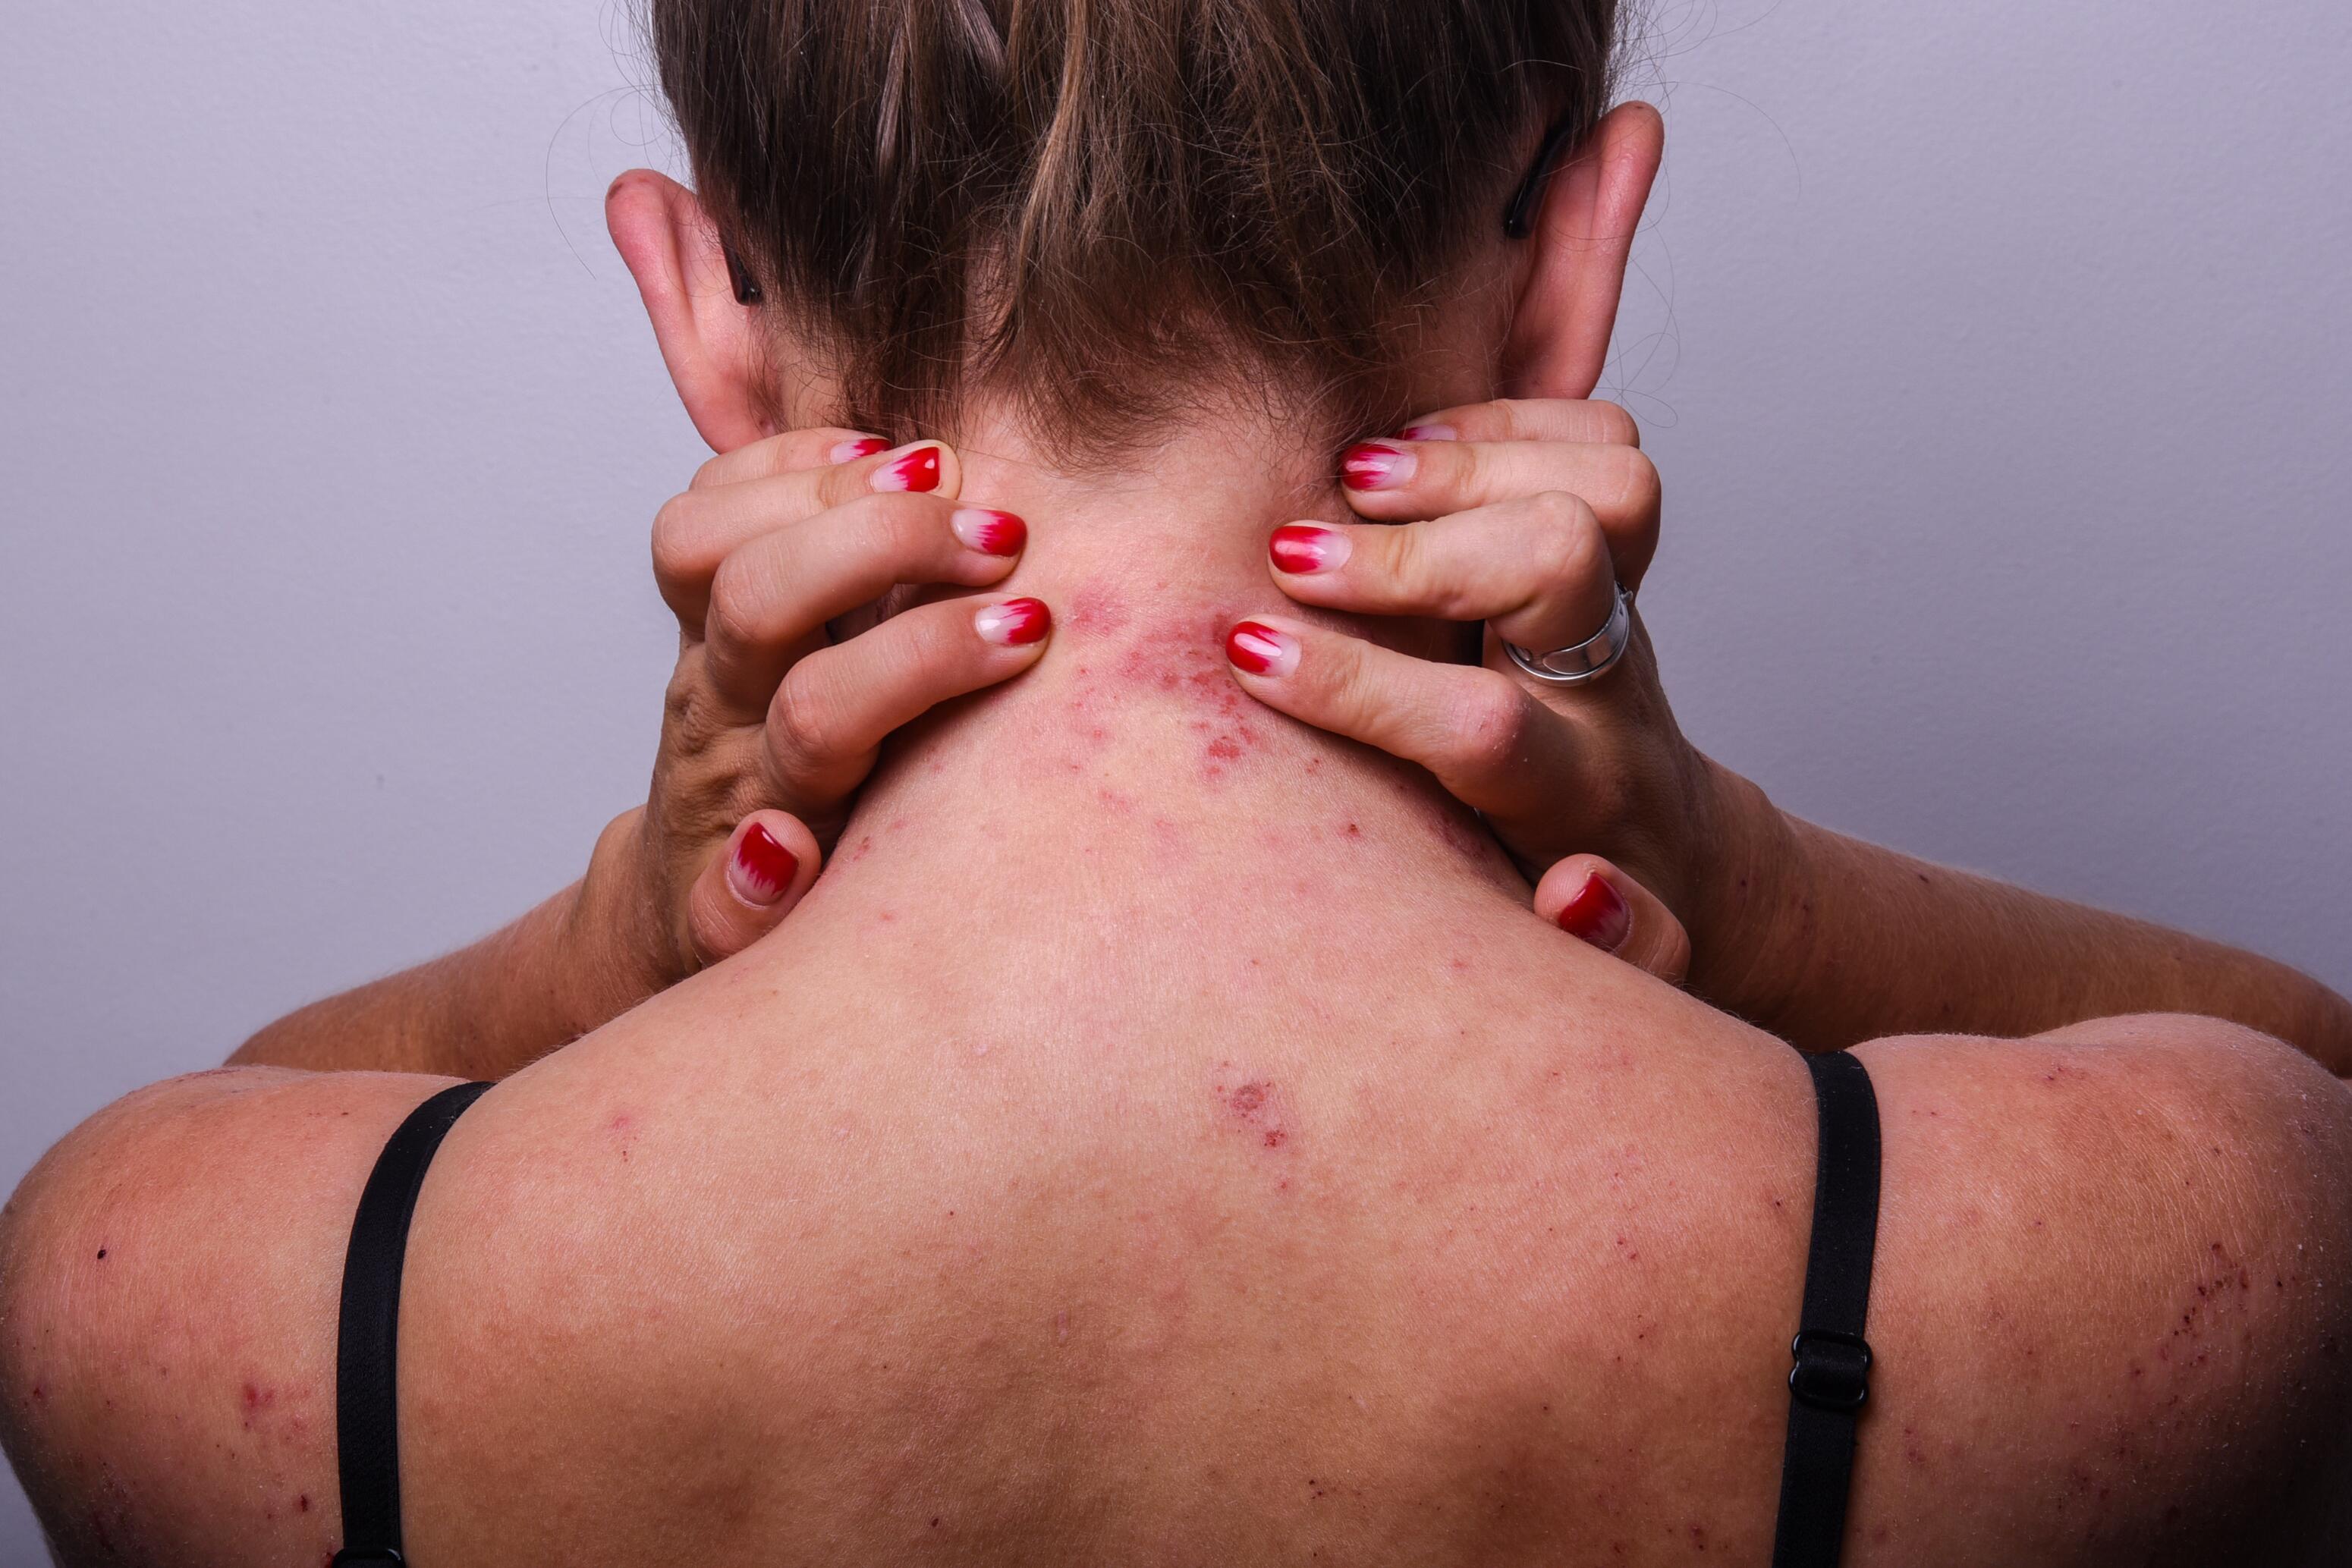 Woman with atopic eczema on the nape of the neck and back